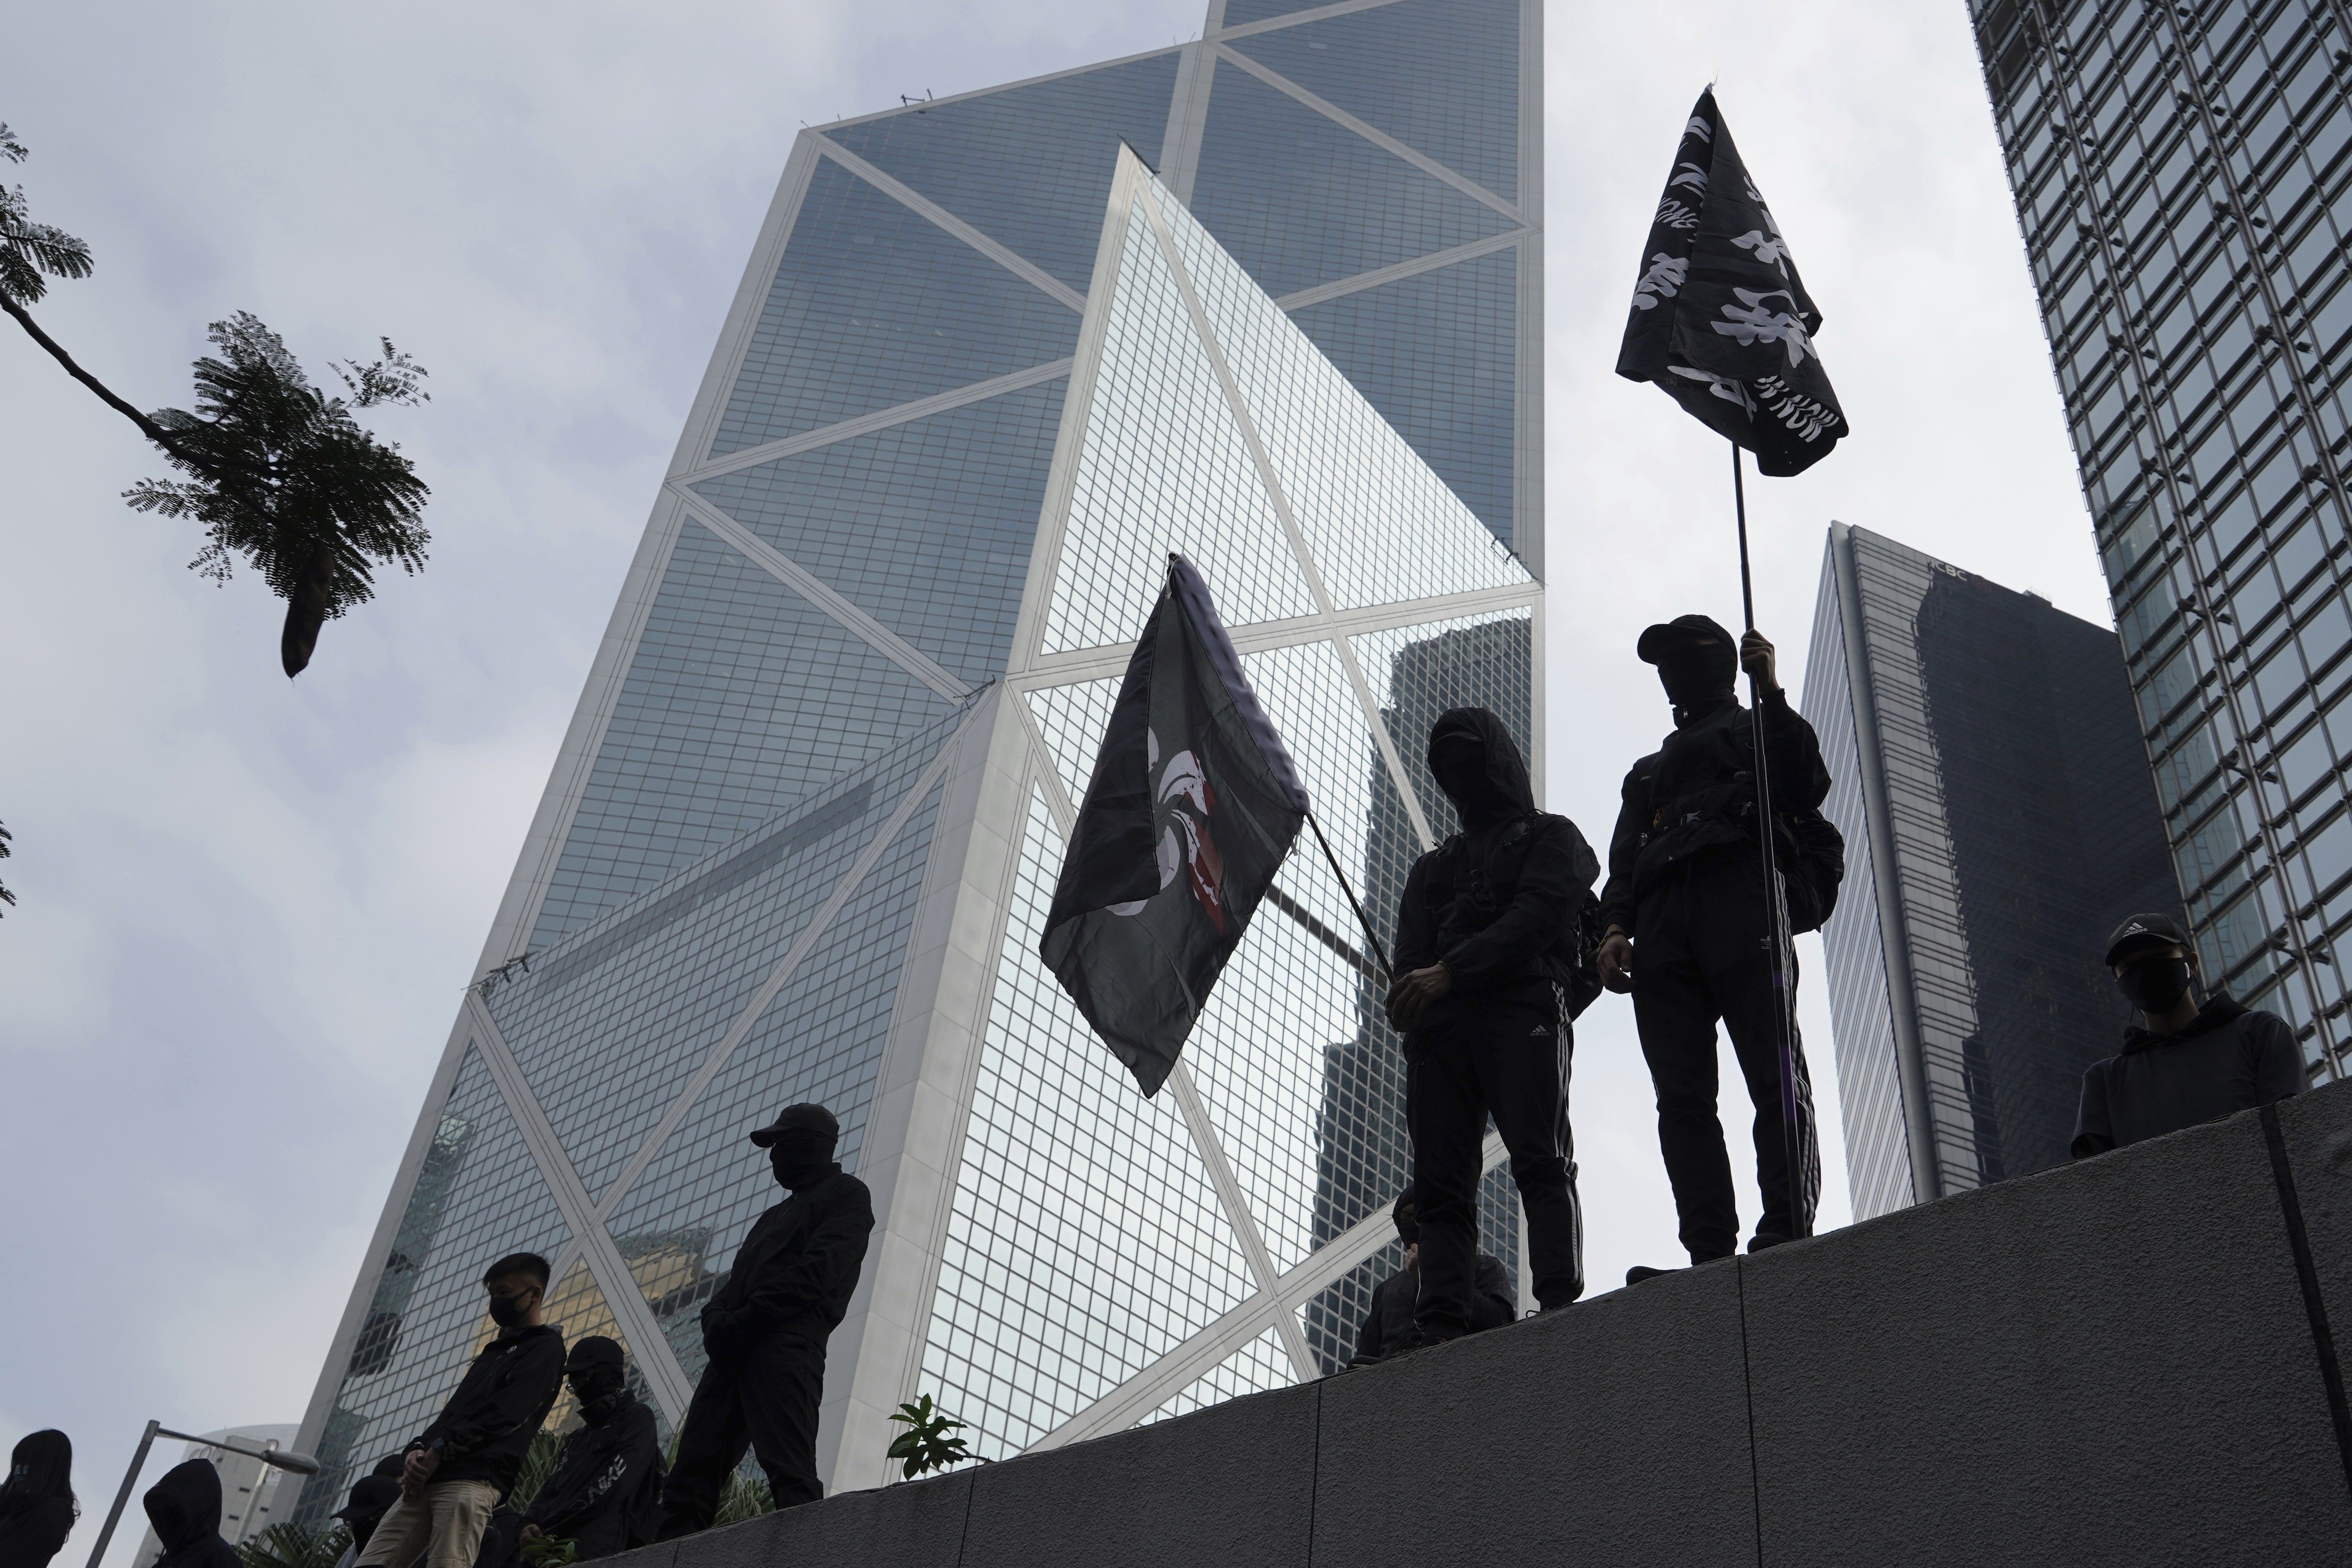 Protesters calling for electoral reforms in Hong Kong gather for a rally on January 19. Hong Kong has, for the past seven months, been embroiled in protests sparked by opposition to an extradition bill. Photo: AP